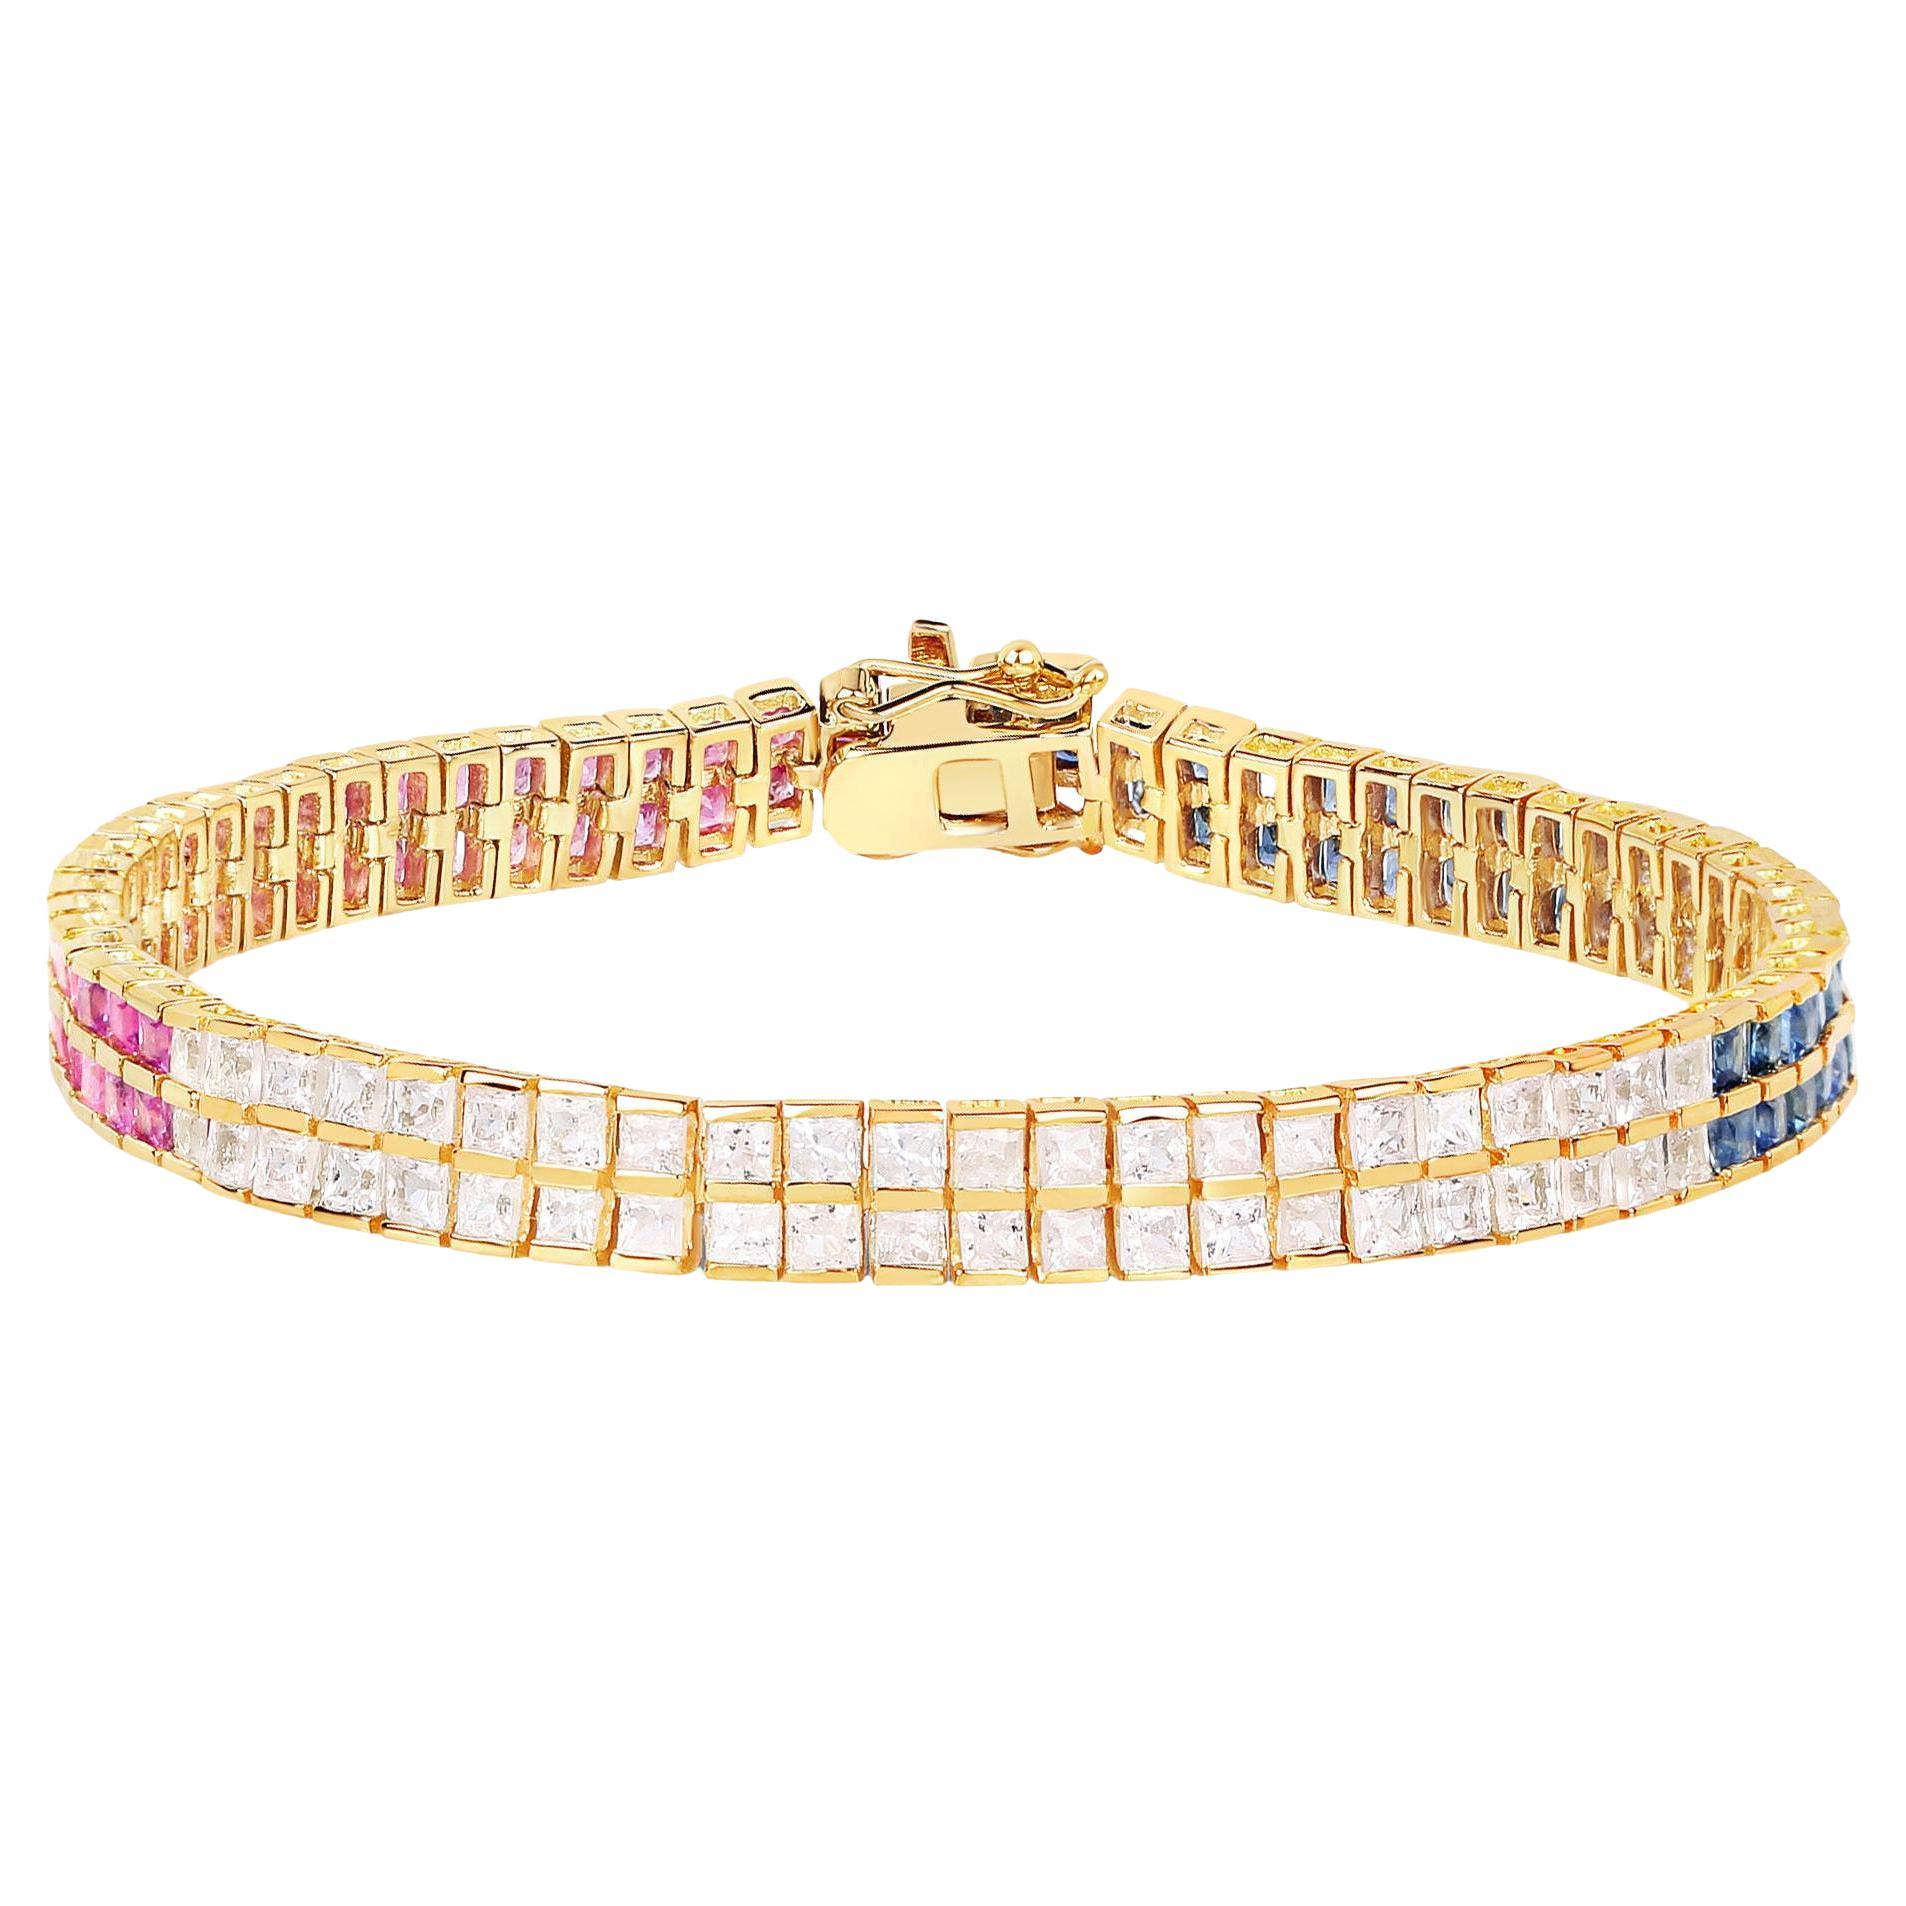 Multicolor Sapphire Bracelet Pink Blue White 9.52 Carats 14K Yellow Gold Plated 